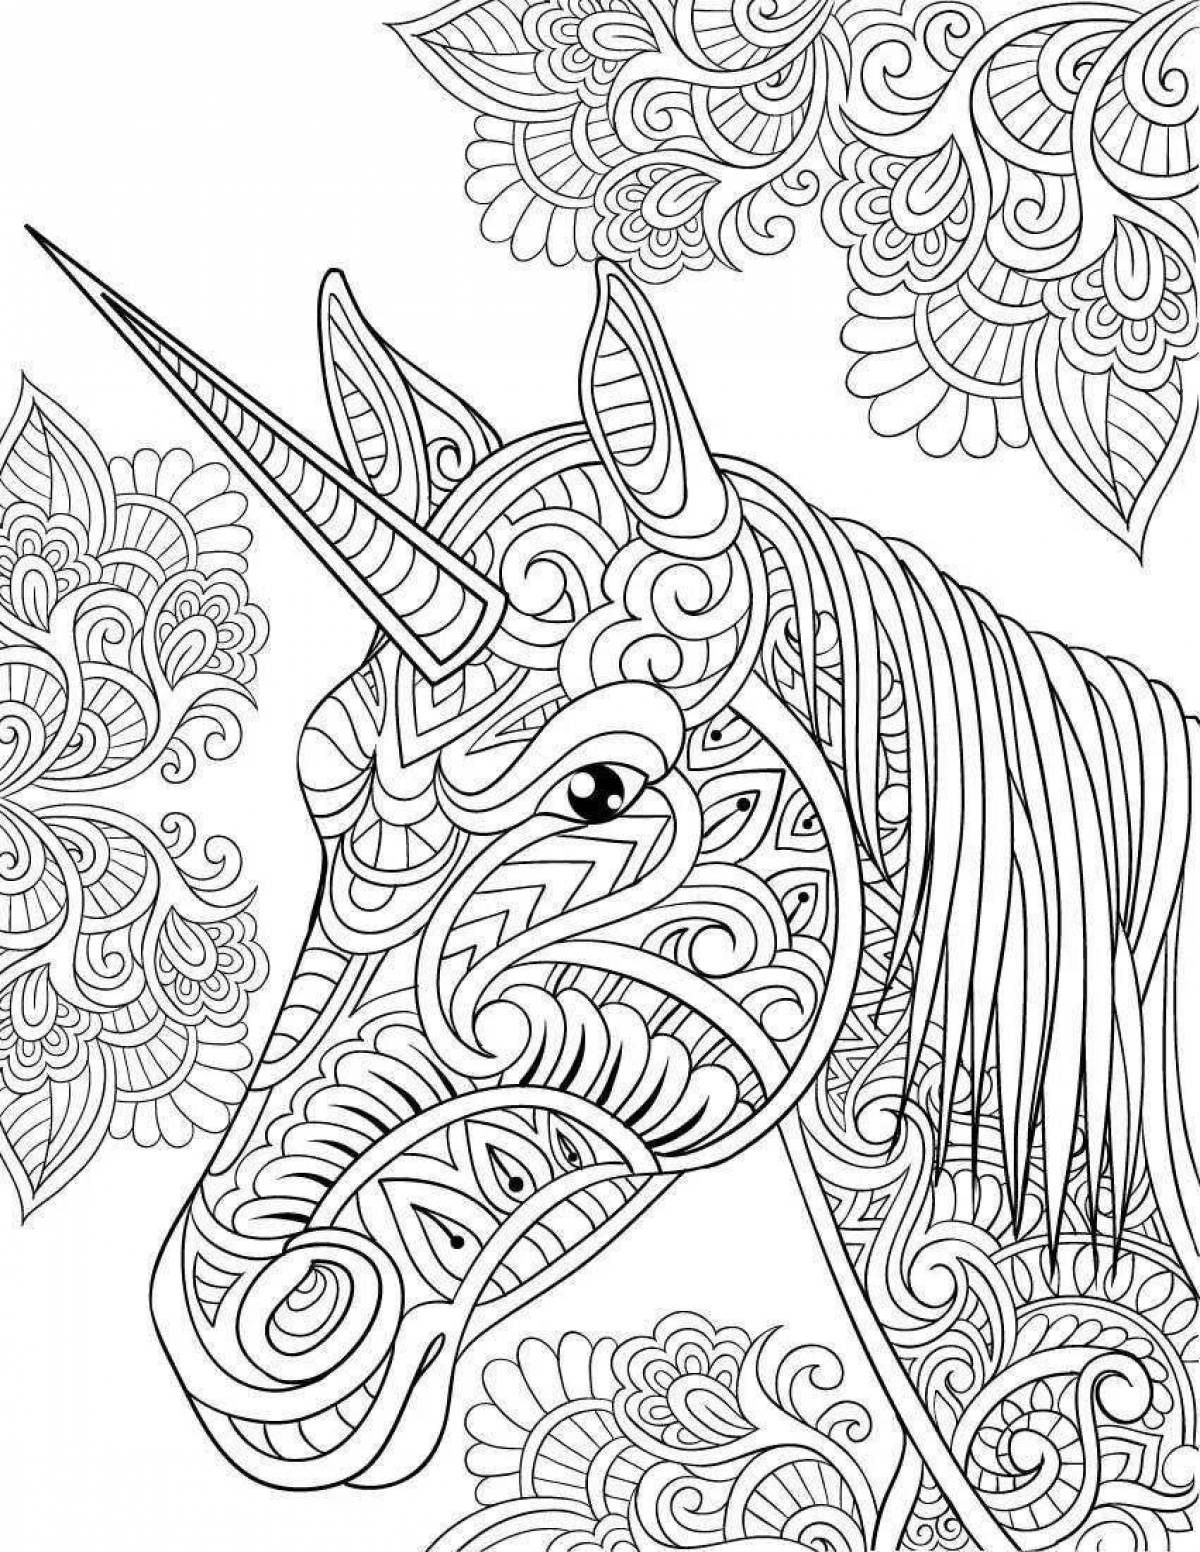 Exciting anti-stress coloring 